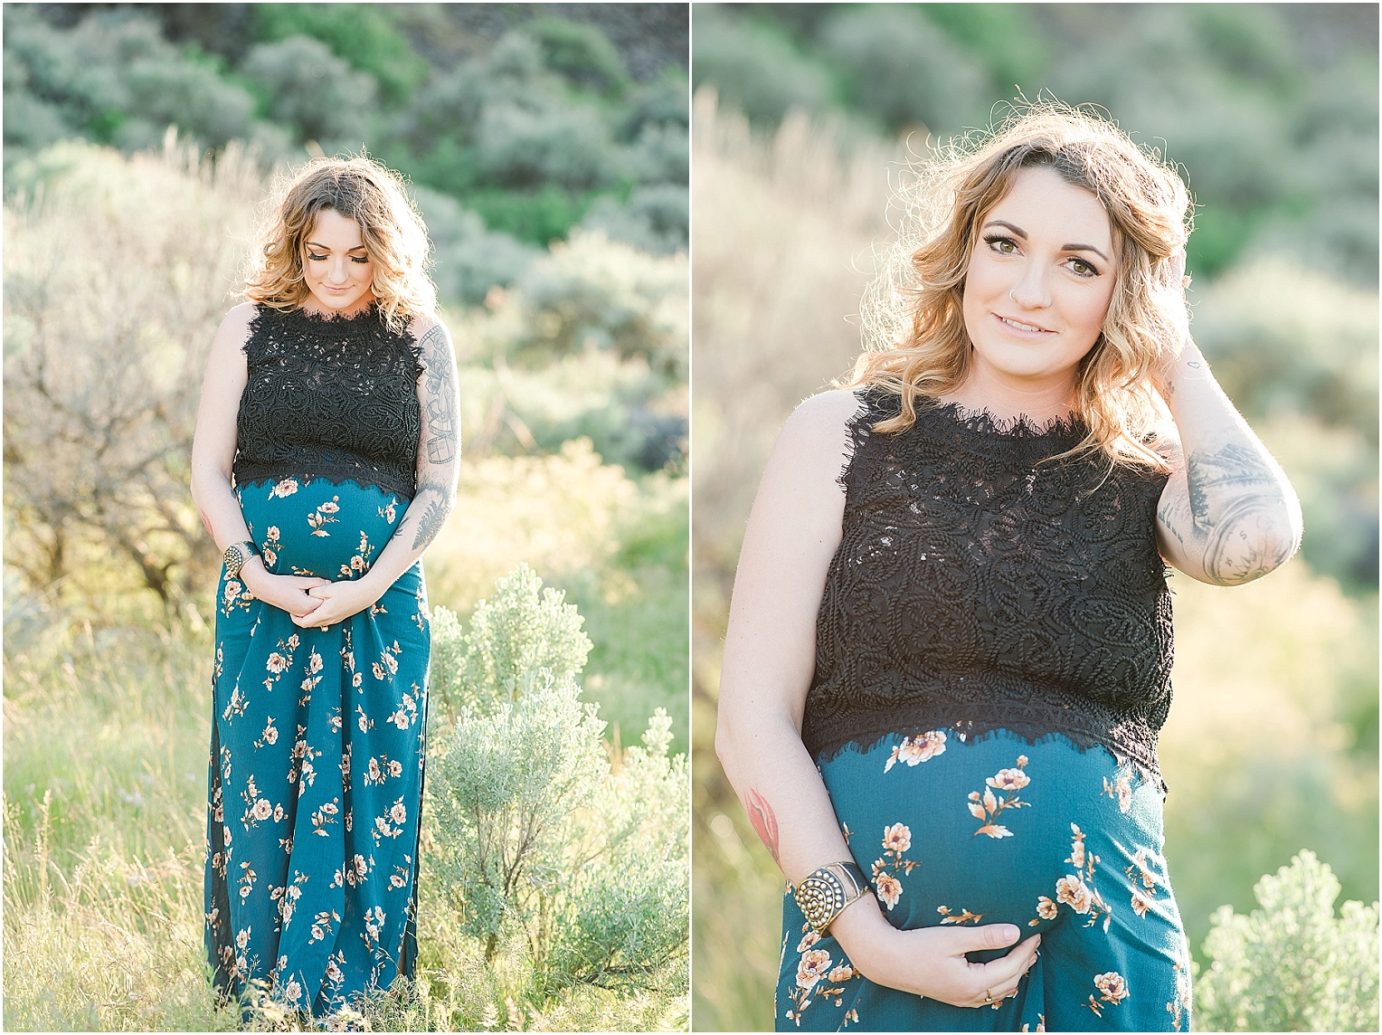 Vantage Crags Maternity Session unposed mom in the desert